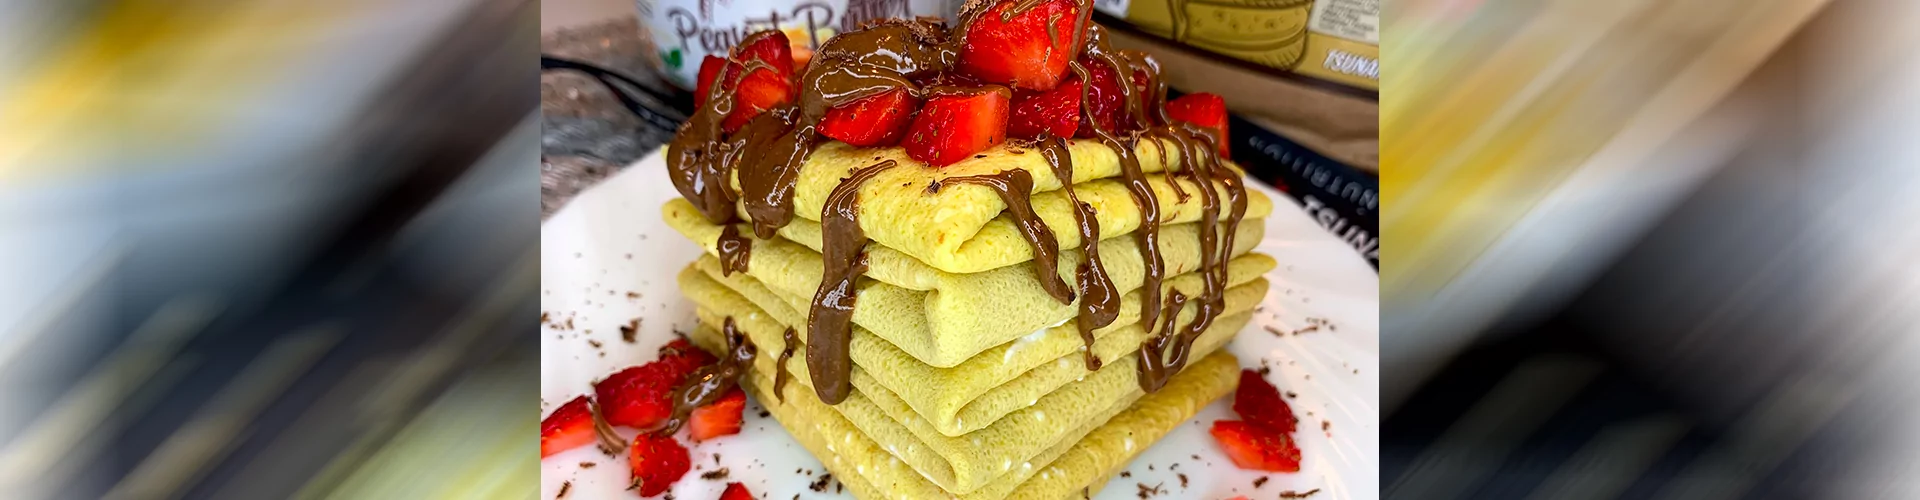 Strawberry-crepes